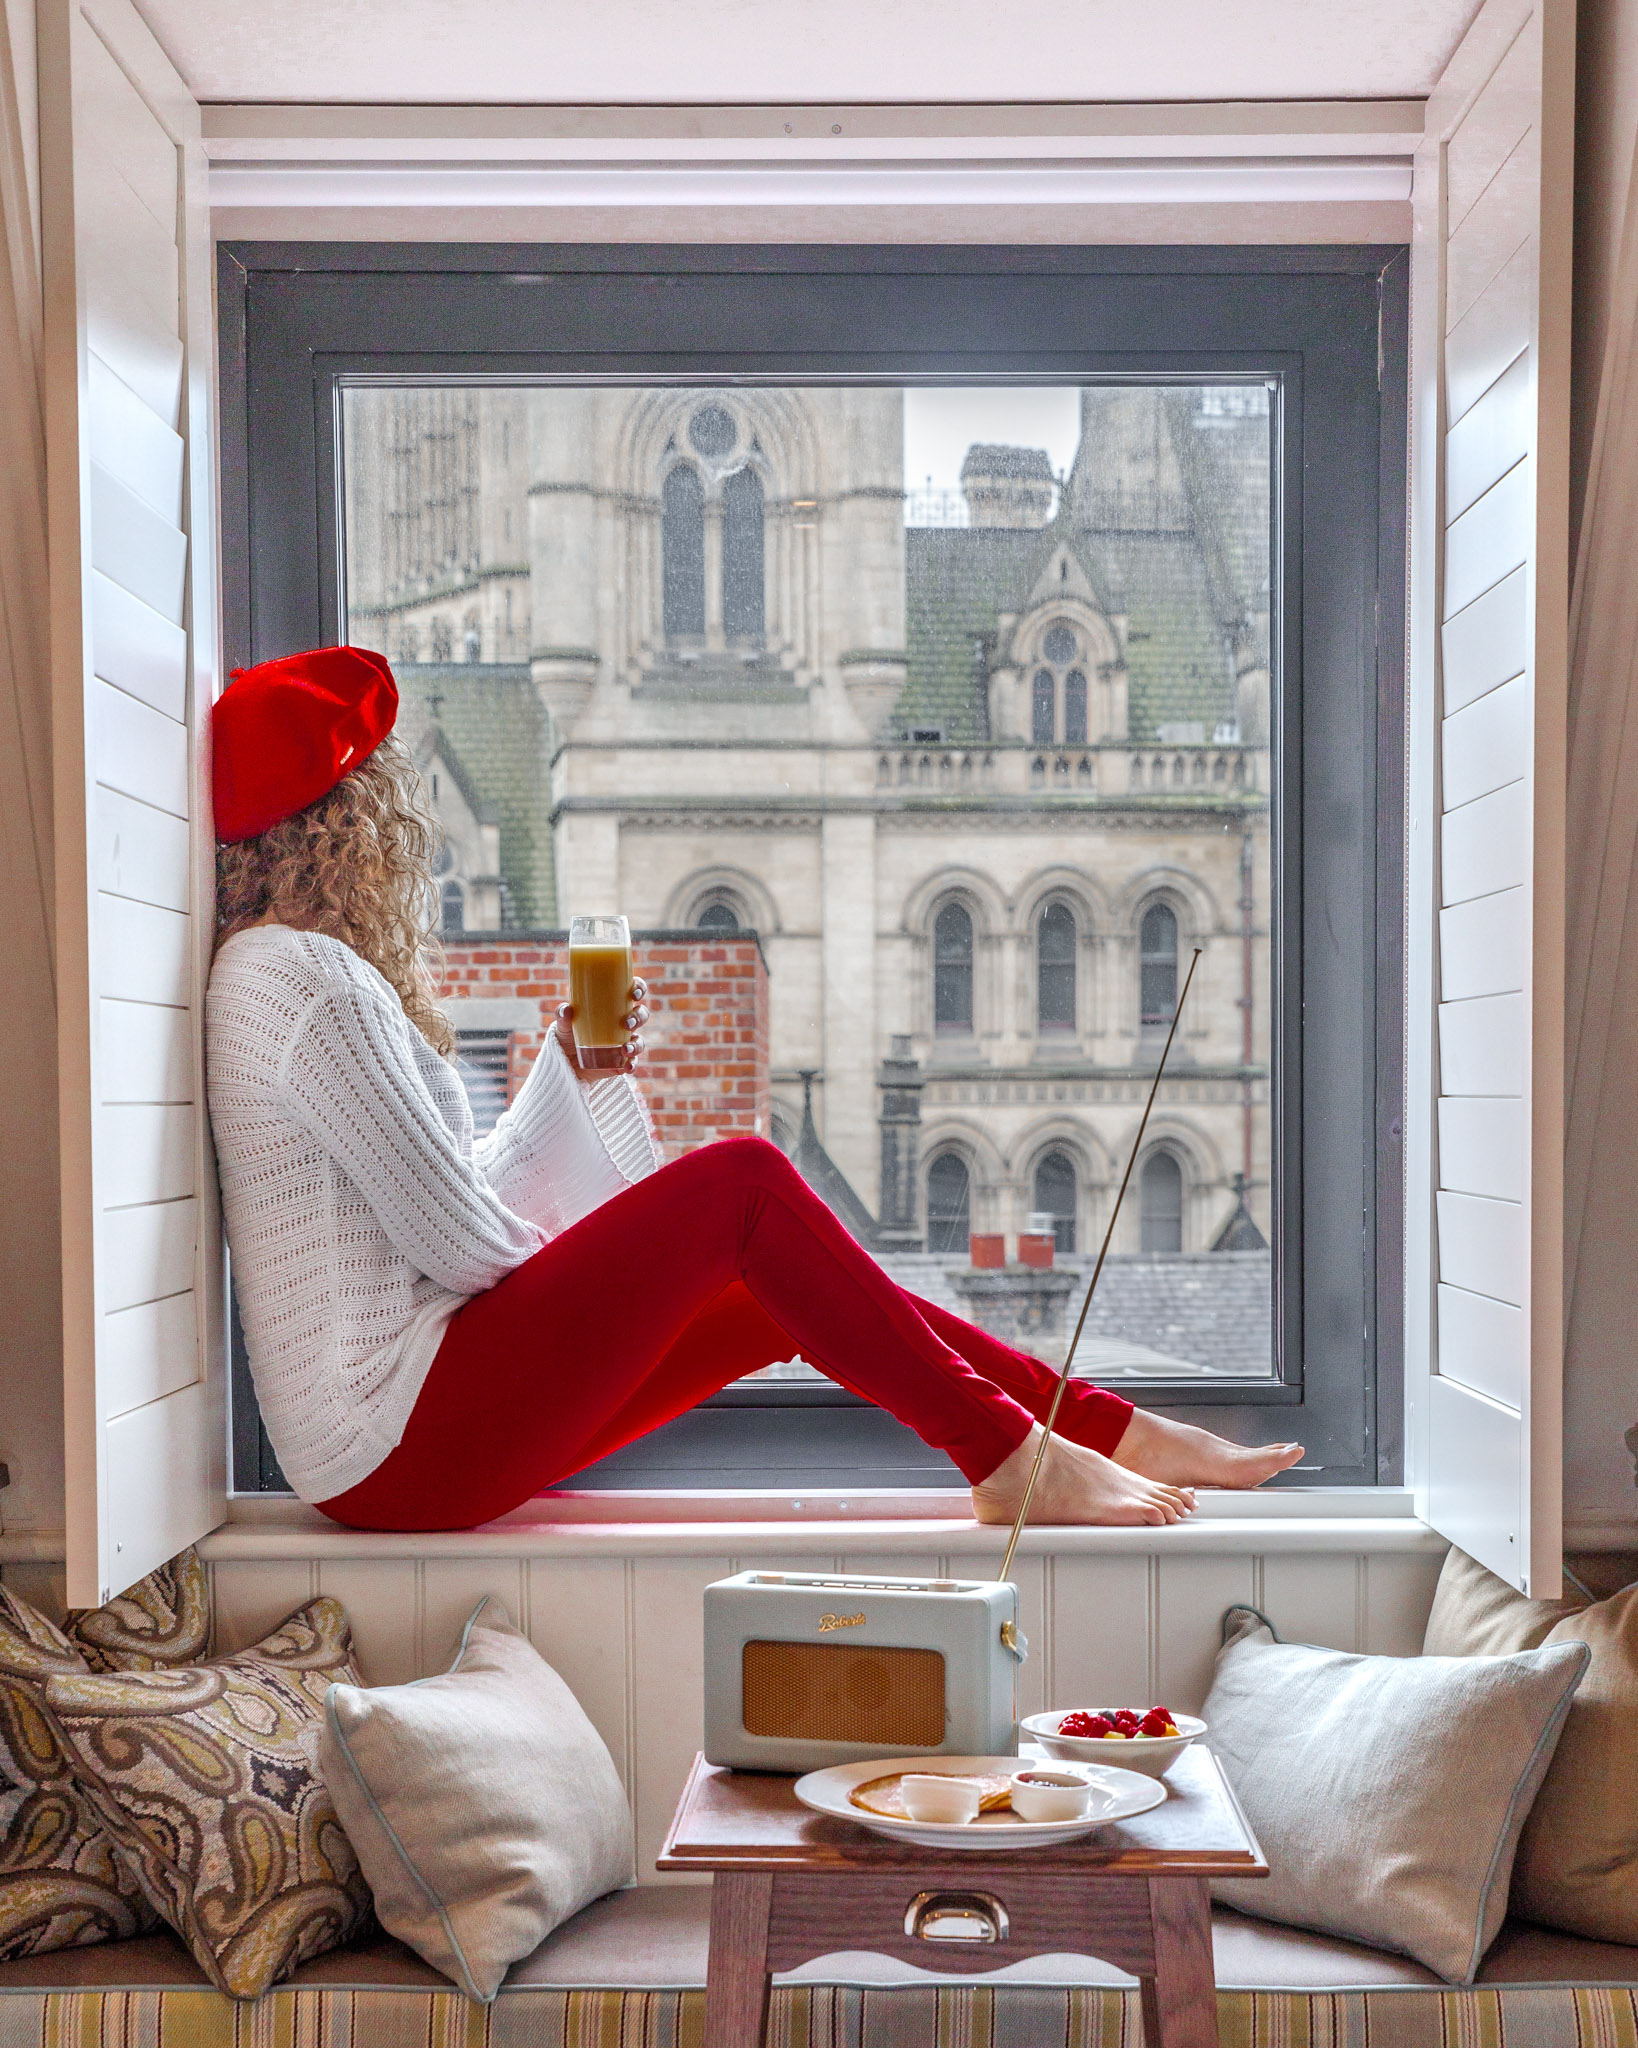 The cute rooms with a view at King Street Townhouse in Manchester // 11 INSTAGRAM-WORTHY PHOTO SPOTS IN MANCHESTER, ENGLAND // www.readysetjetset.net #readysetjetset #manchester #england #uk #unitedkingdom #cityguide #travel